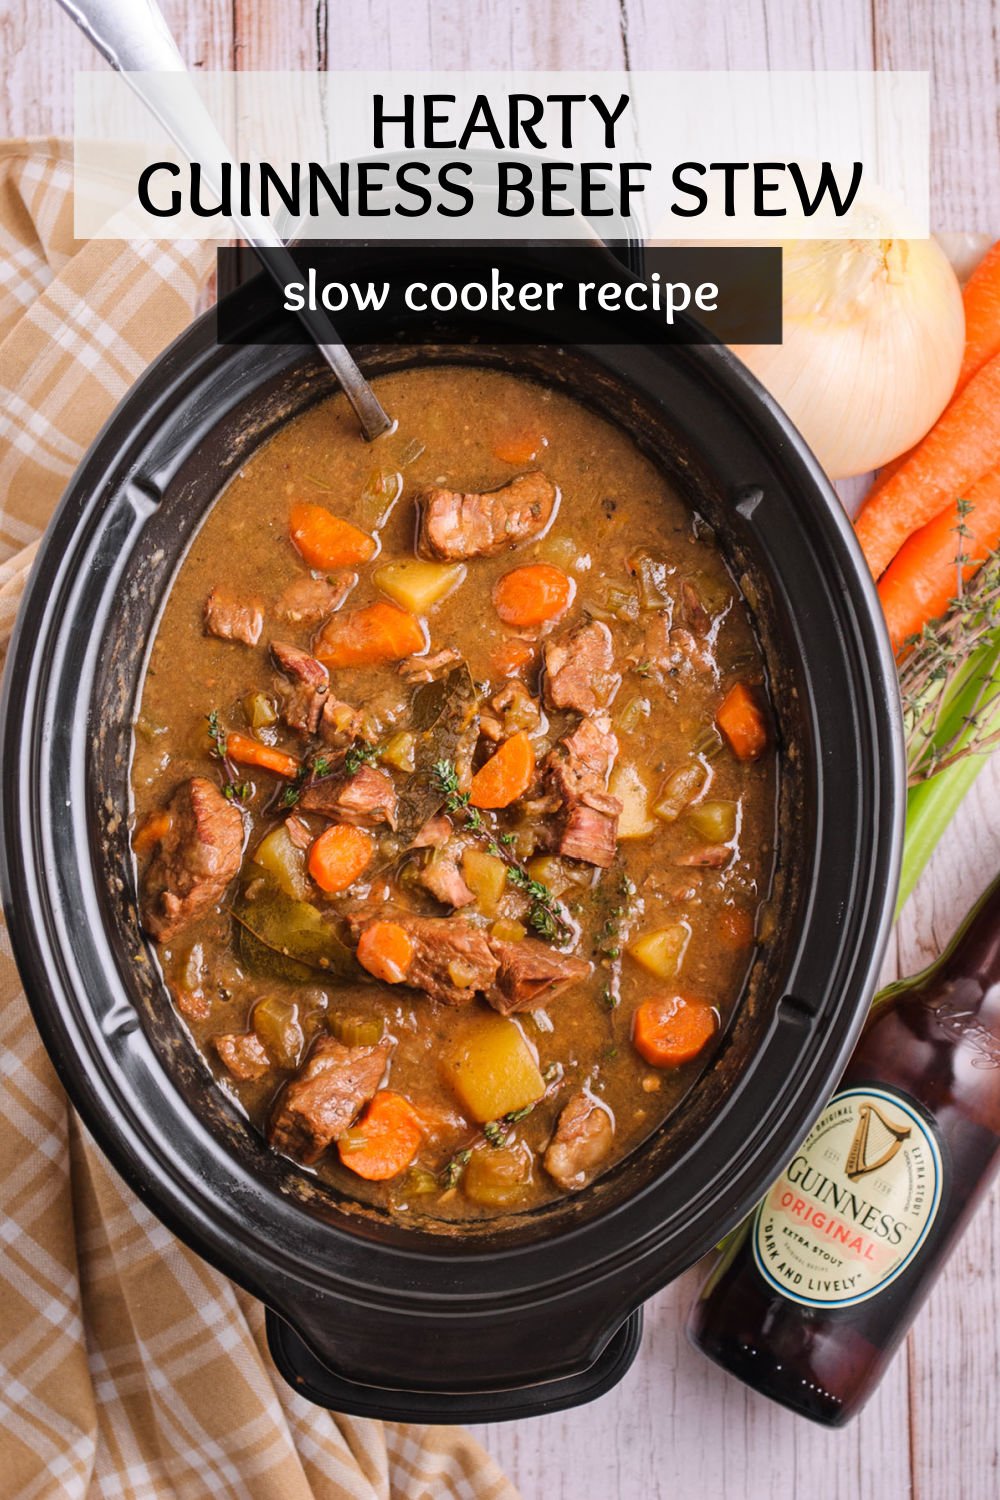 Crockpot Irish Guinness Beef Stew - A classic Irish beef stew with a Guinness base, packed with potatoes, carrots, and tender slow-cooked beef. Full of fresh herbs, this stew evokes a feeling of true comfort on cold winter nights. | www.persnicketyplates.com